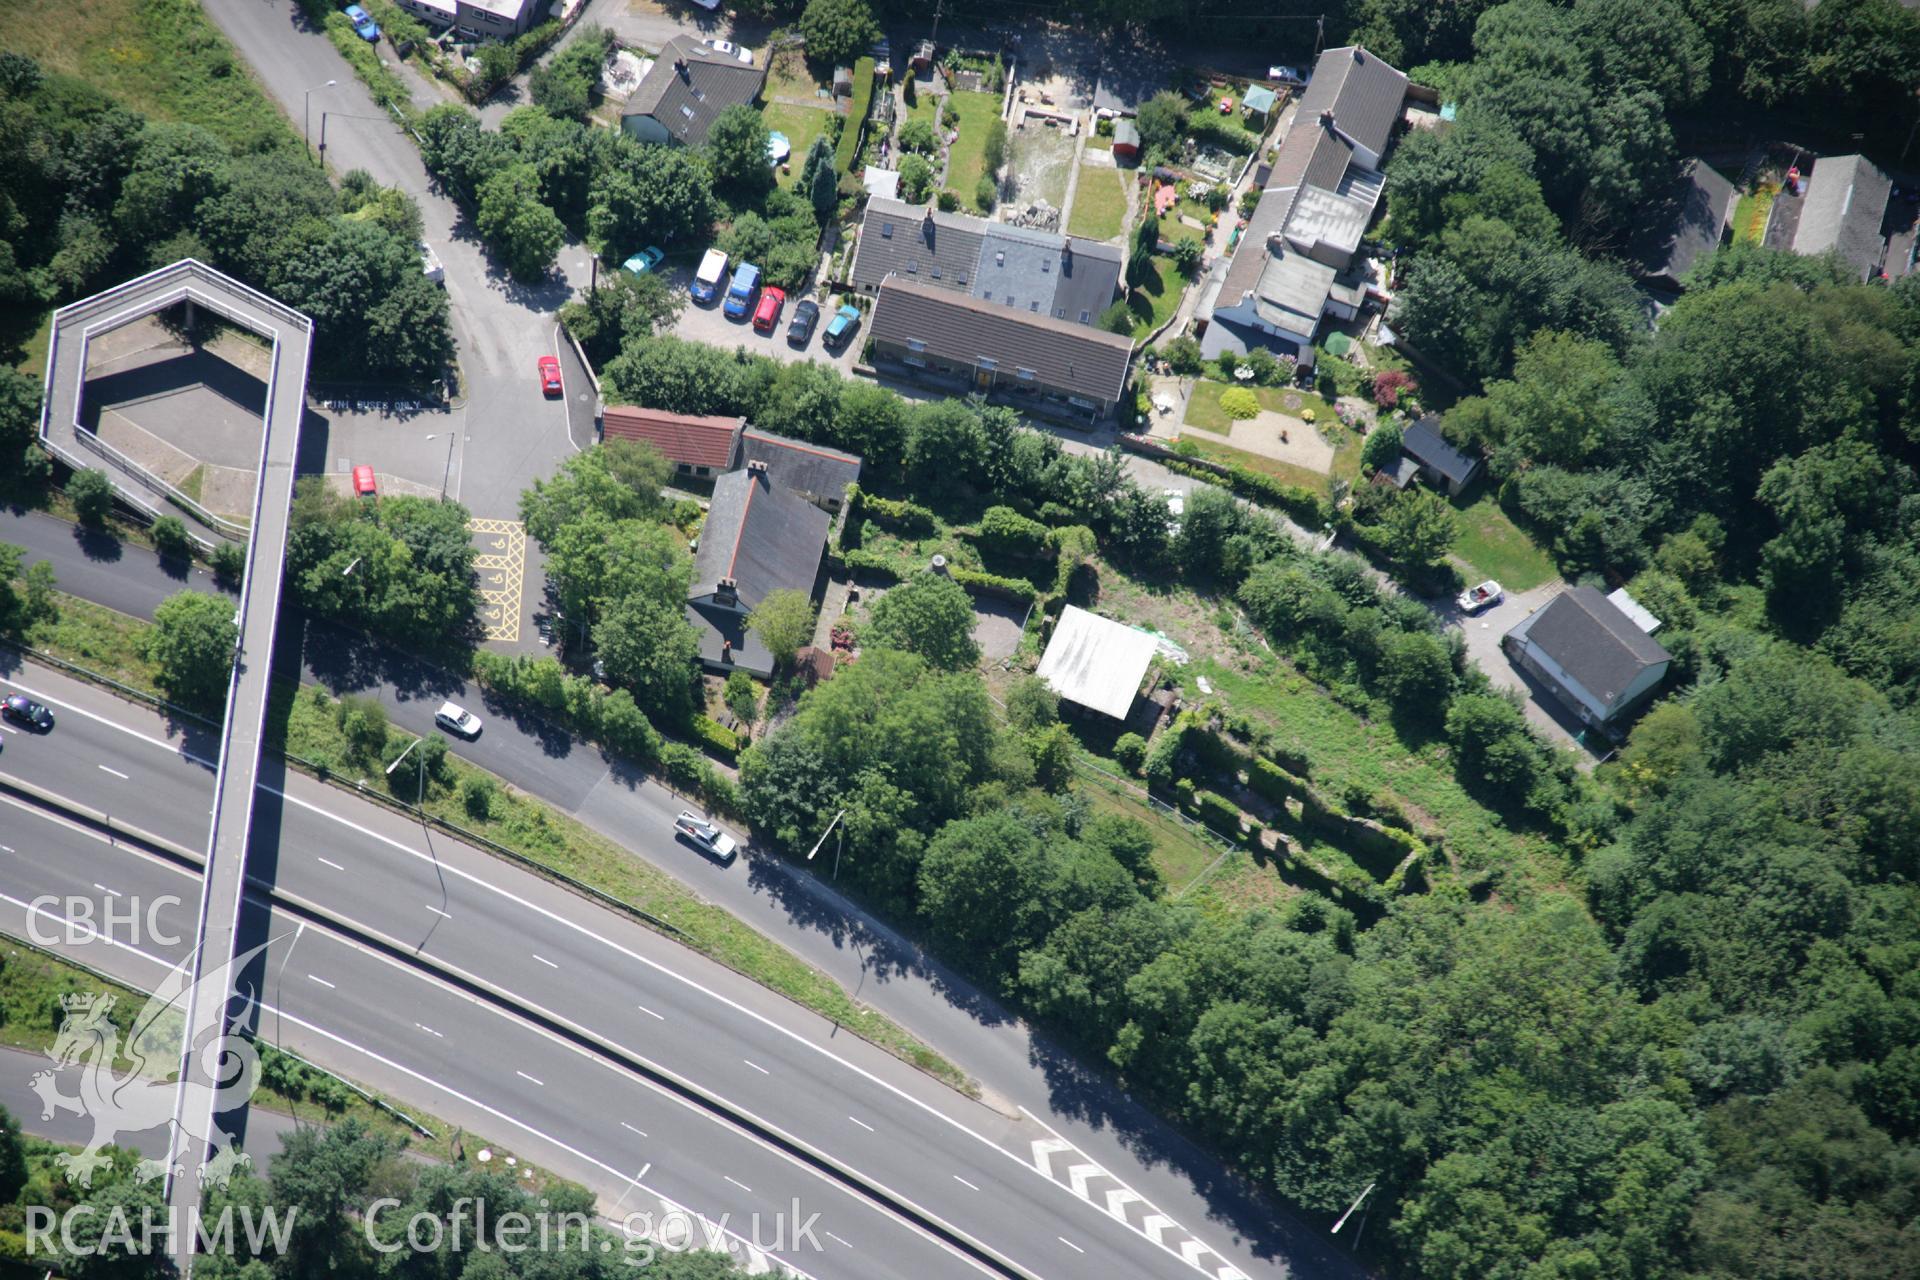 RCAHMW colour oblique aerial photograph of Nantgarw Pottery, Taff's Well. Taken on 24 July 2006 by Toby Driver.